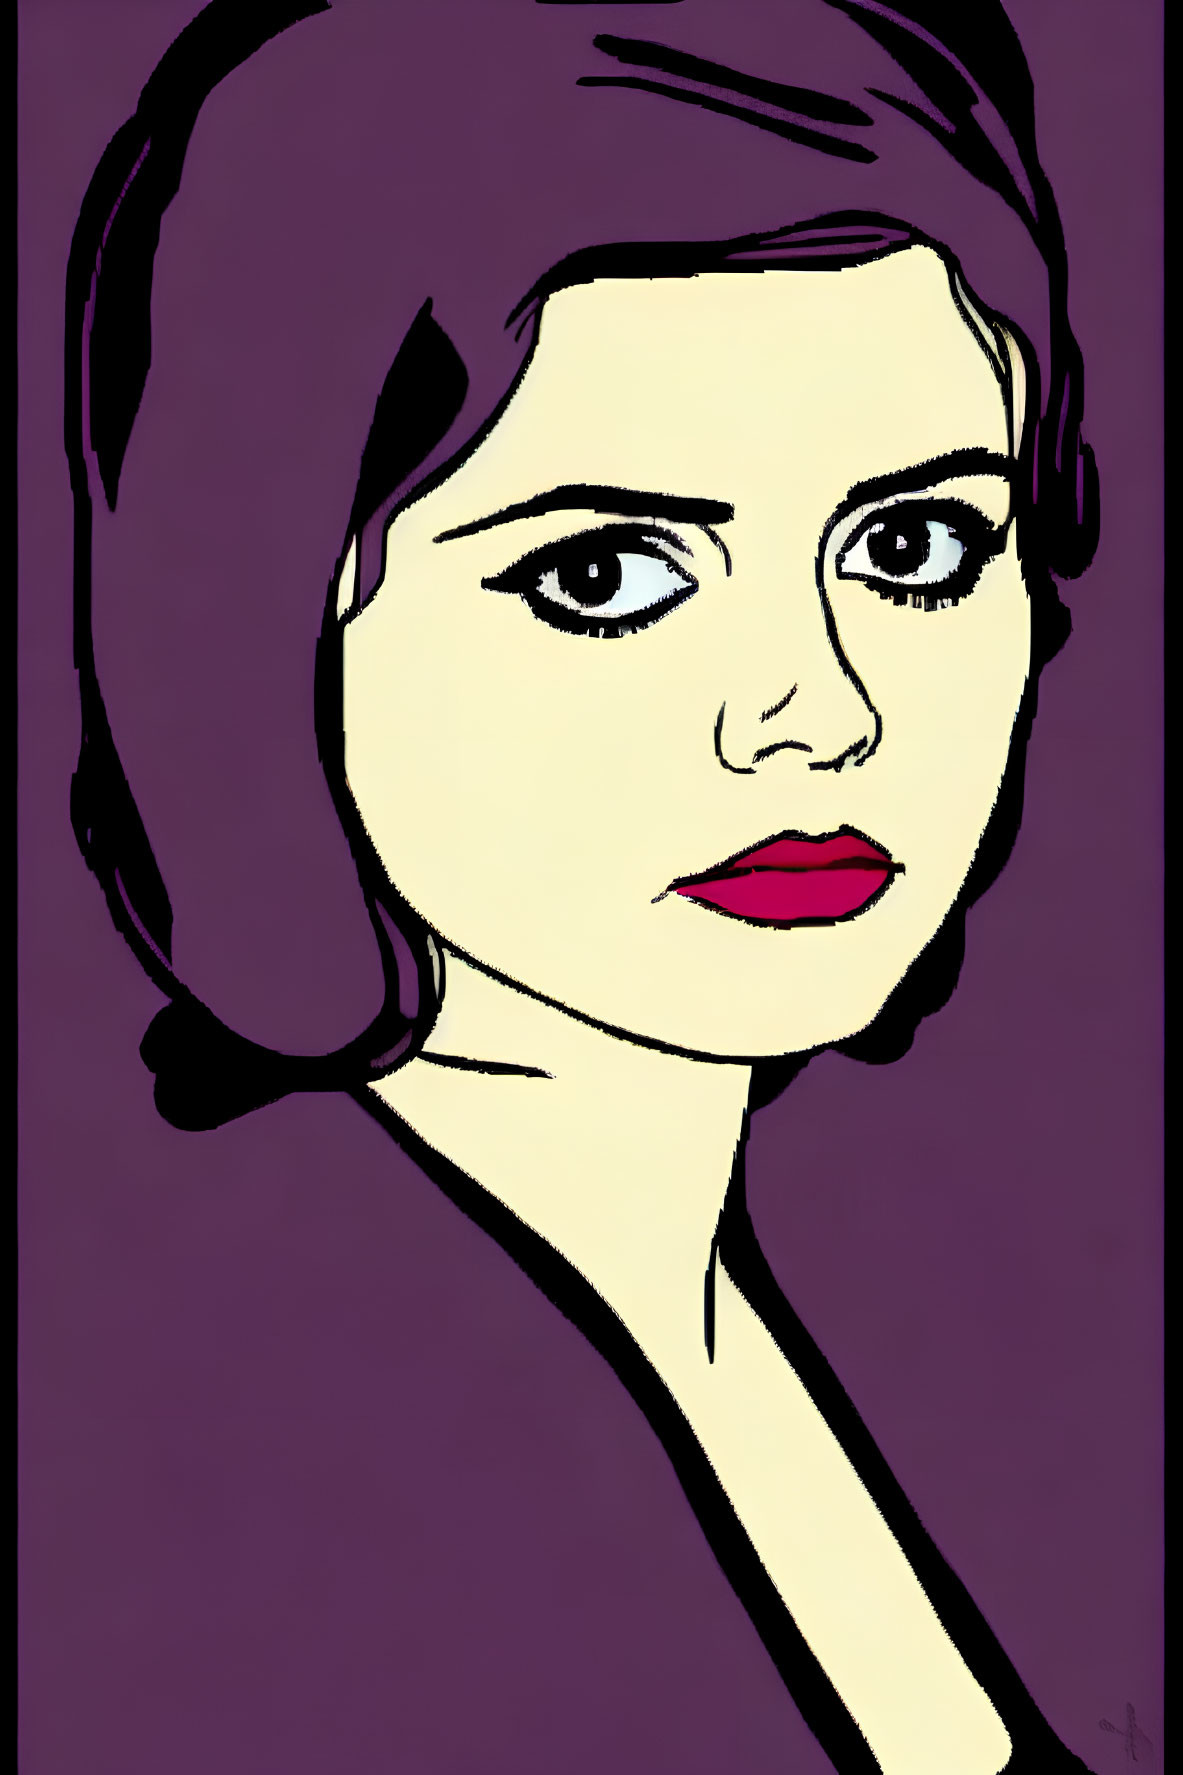 Portrait of Woman with Dark Hair and Bold Eyes on Purple Background